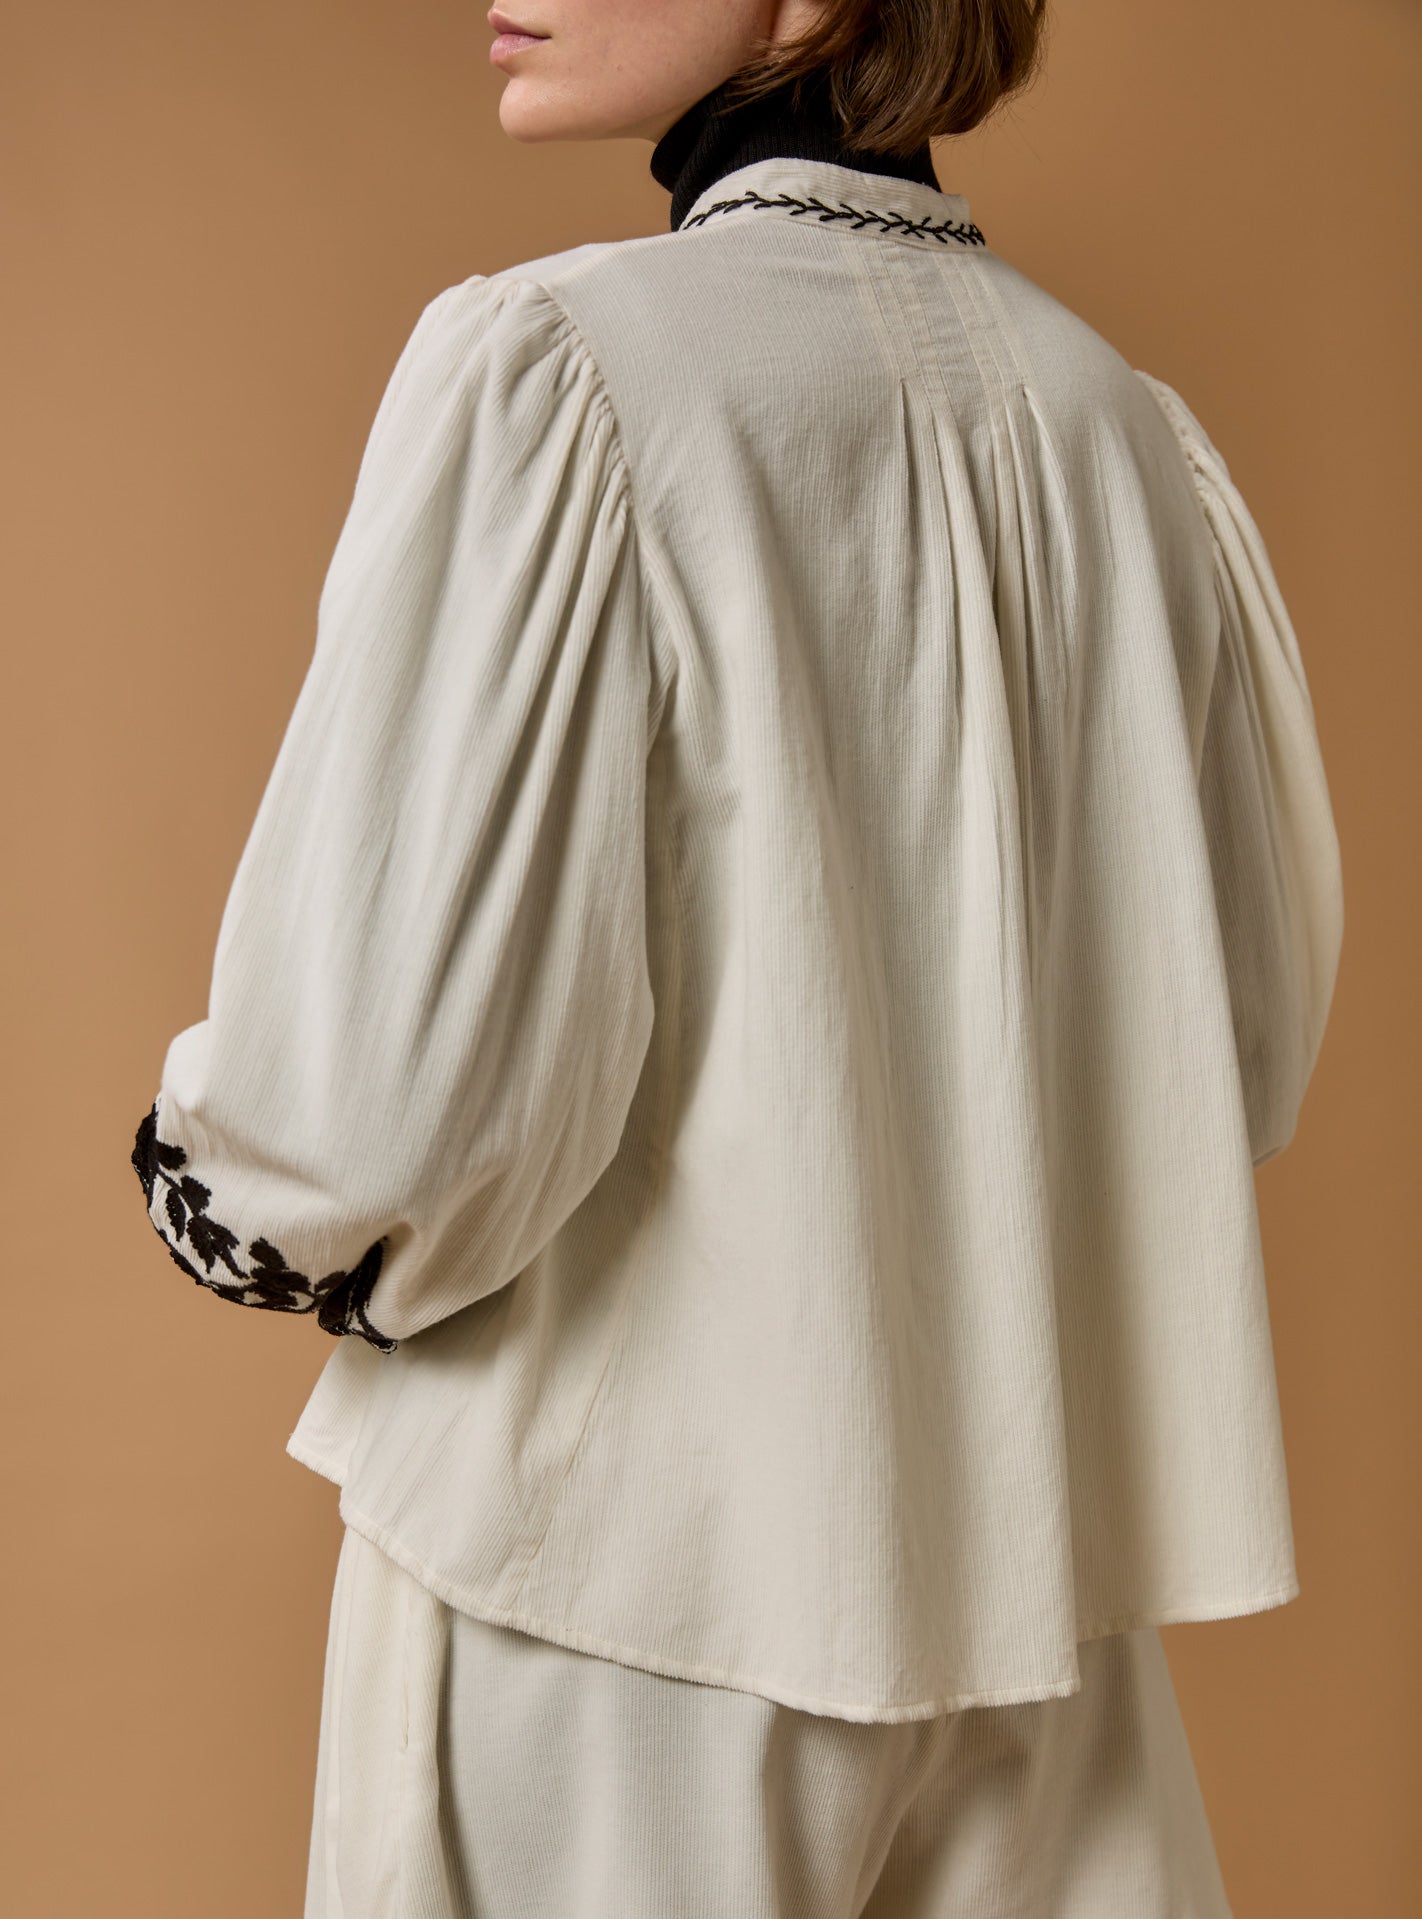 Back view of Yana corduroy Cream Blouse with black embroidered by Thierry Colson